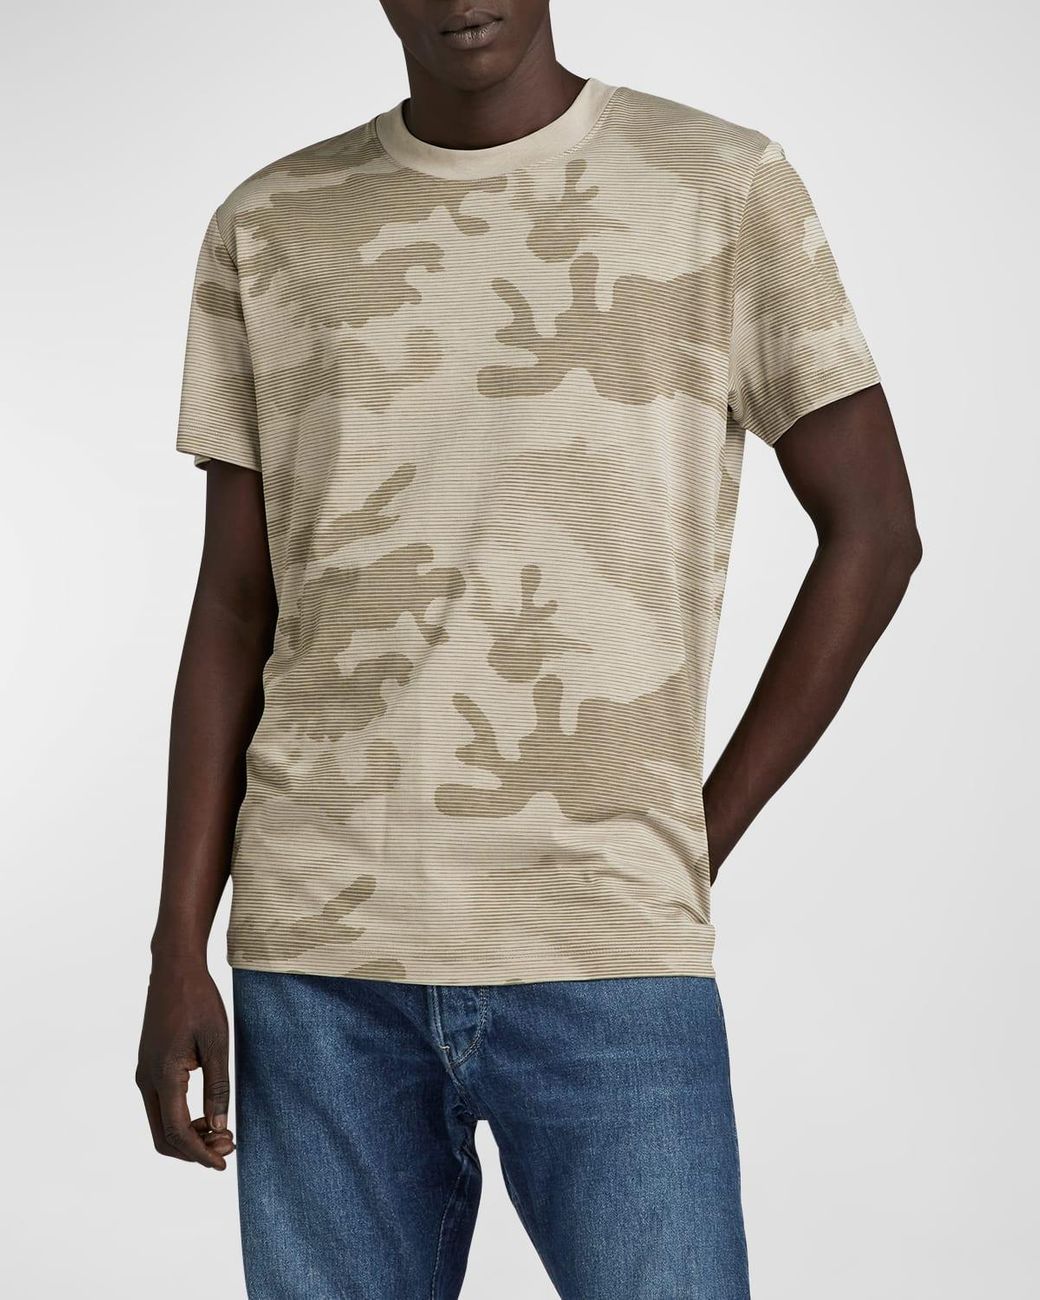 G-Star RAW Mne's Line Camo T-shirt in Natural for Men | Lyst